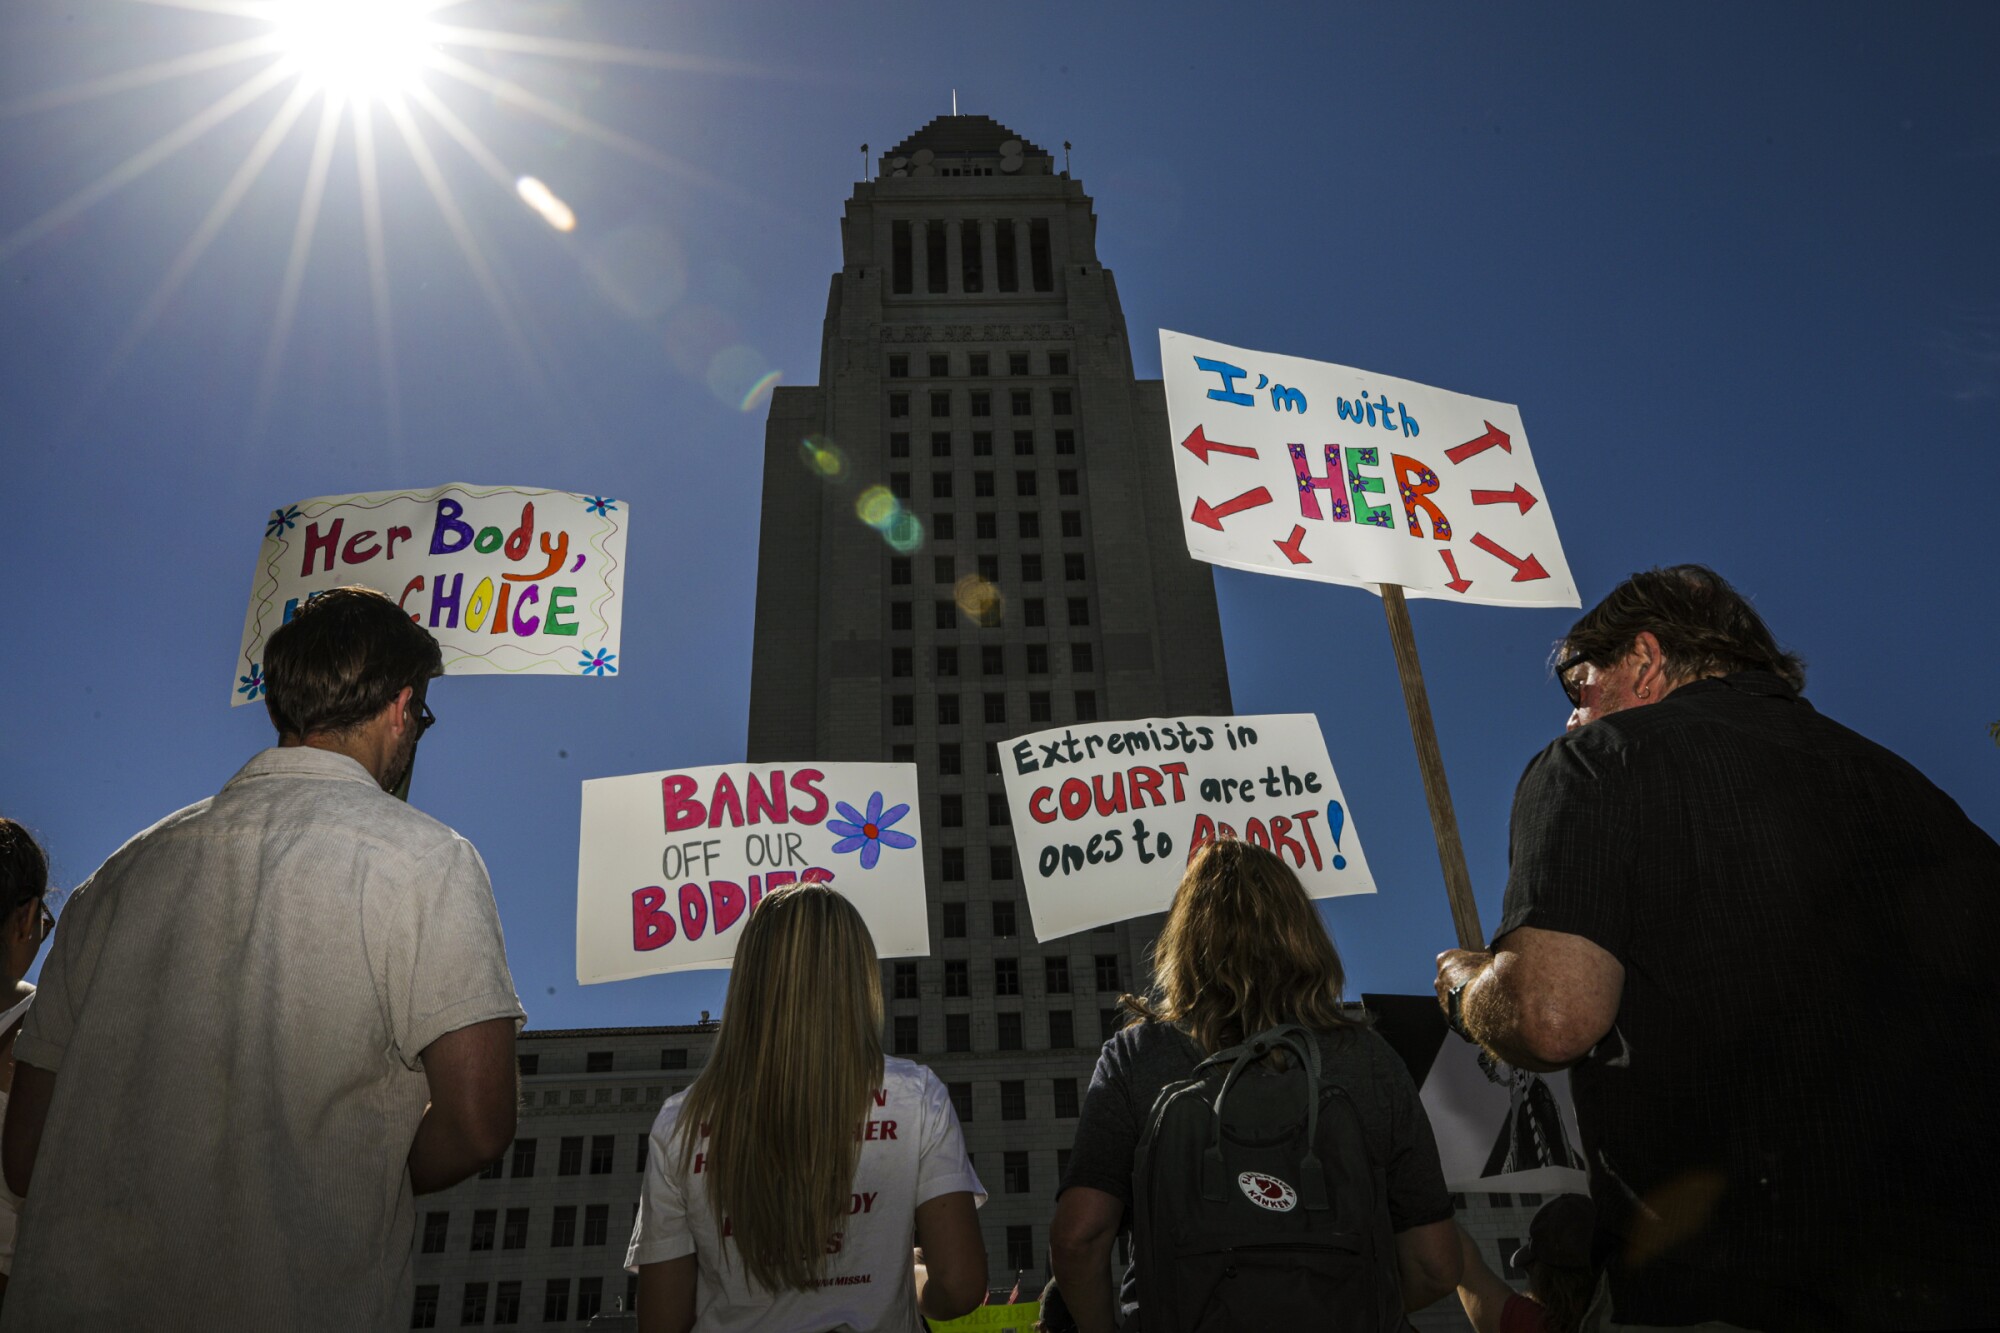 People hold signs at an abortion rights rally in downtown L.A. that read, "I'm with her" and "Bans off our bodies."